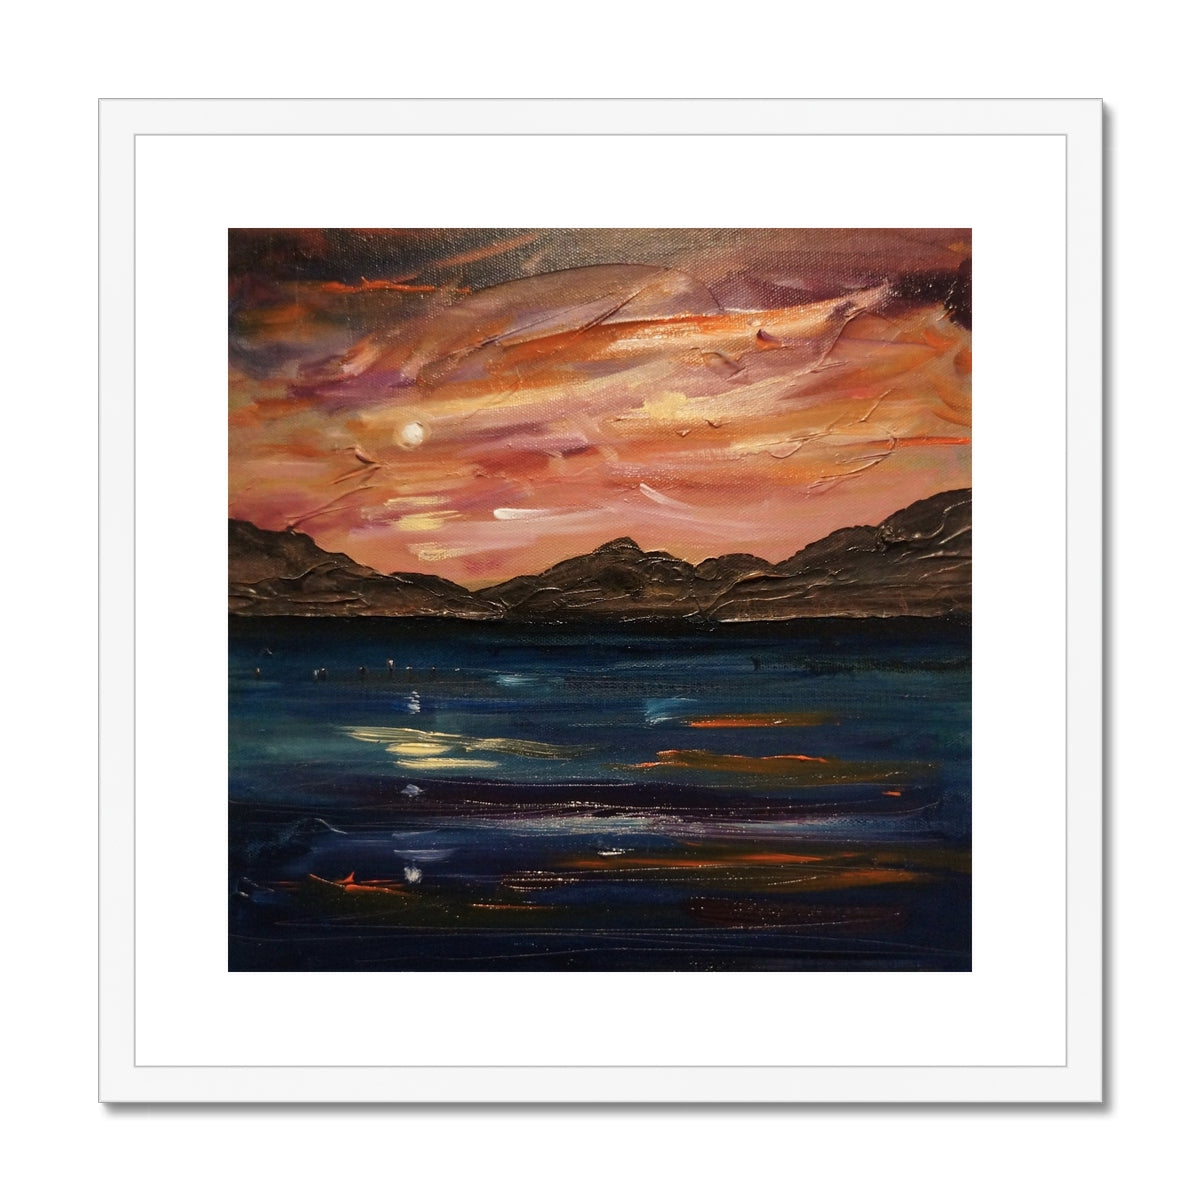 Loch Ness Moonset Painting | Framed & Mounted Prints From Scotland-Framed & Mounted Prints-Scottish Lochs & Mountains Art Gallery-20"x20"-White Frame-Paintings, Prints, Homeware, Art Gifts From Scotland By Scottish Artist Kevin Hunter